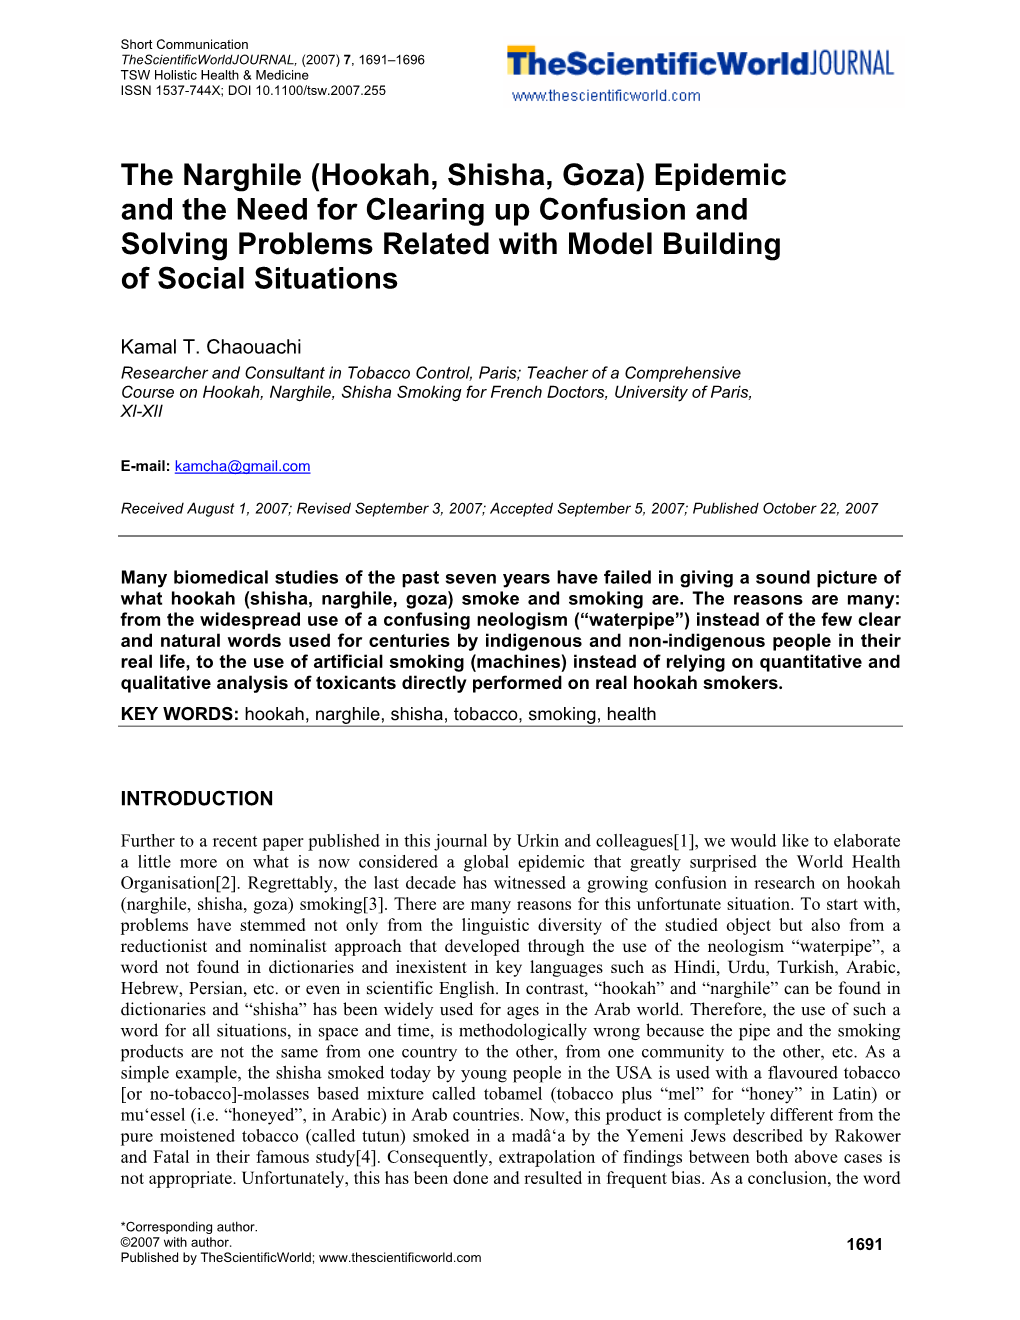 The Narghile (Hookah, Shisha, Goza) Epidemic and the Need for Clearing up Confusion and Solving Problems Related with Model Building of Social Situations